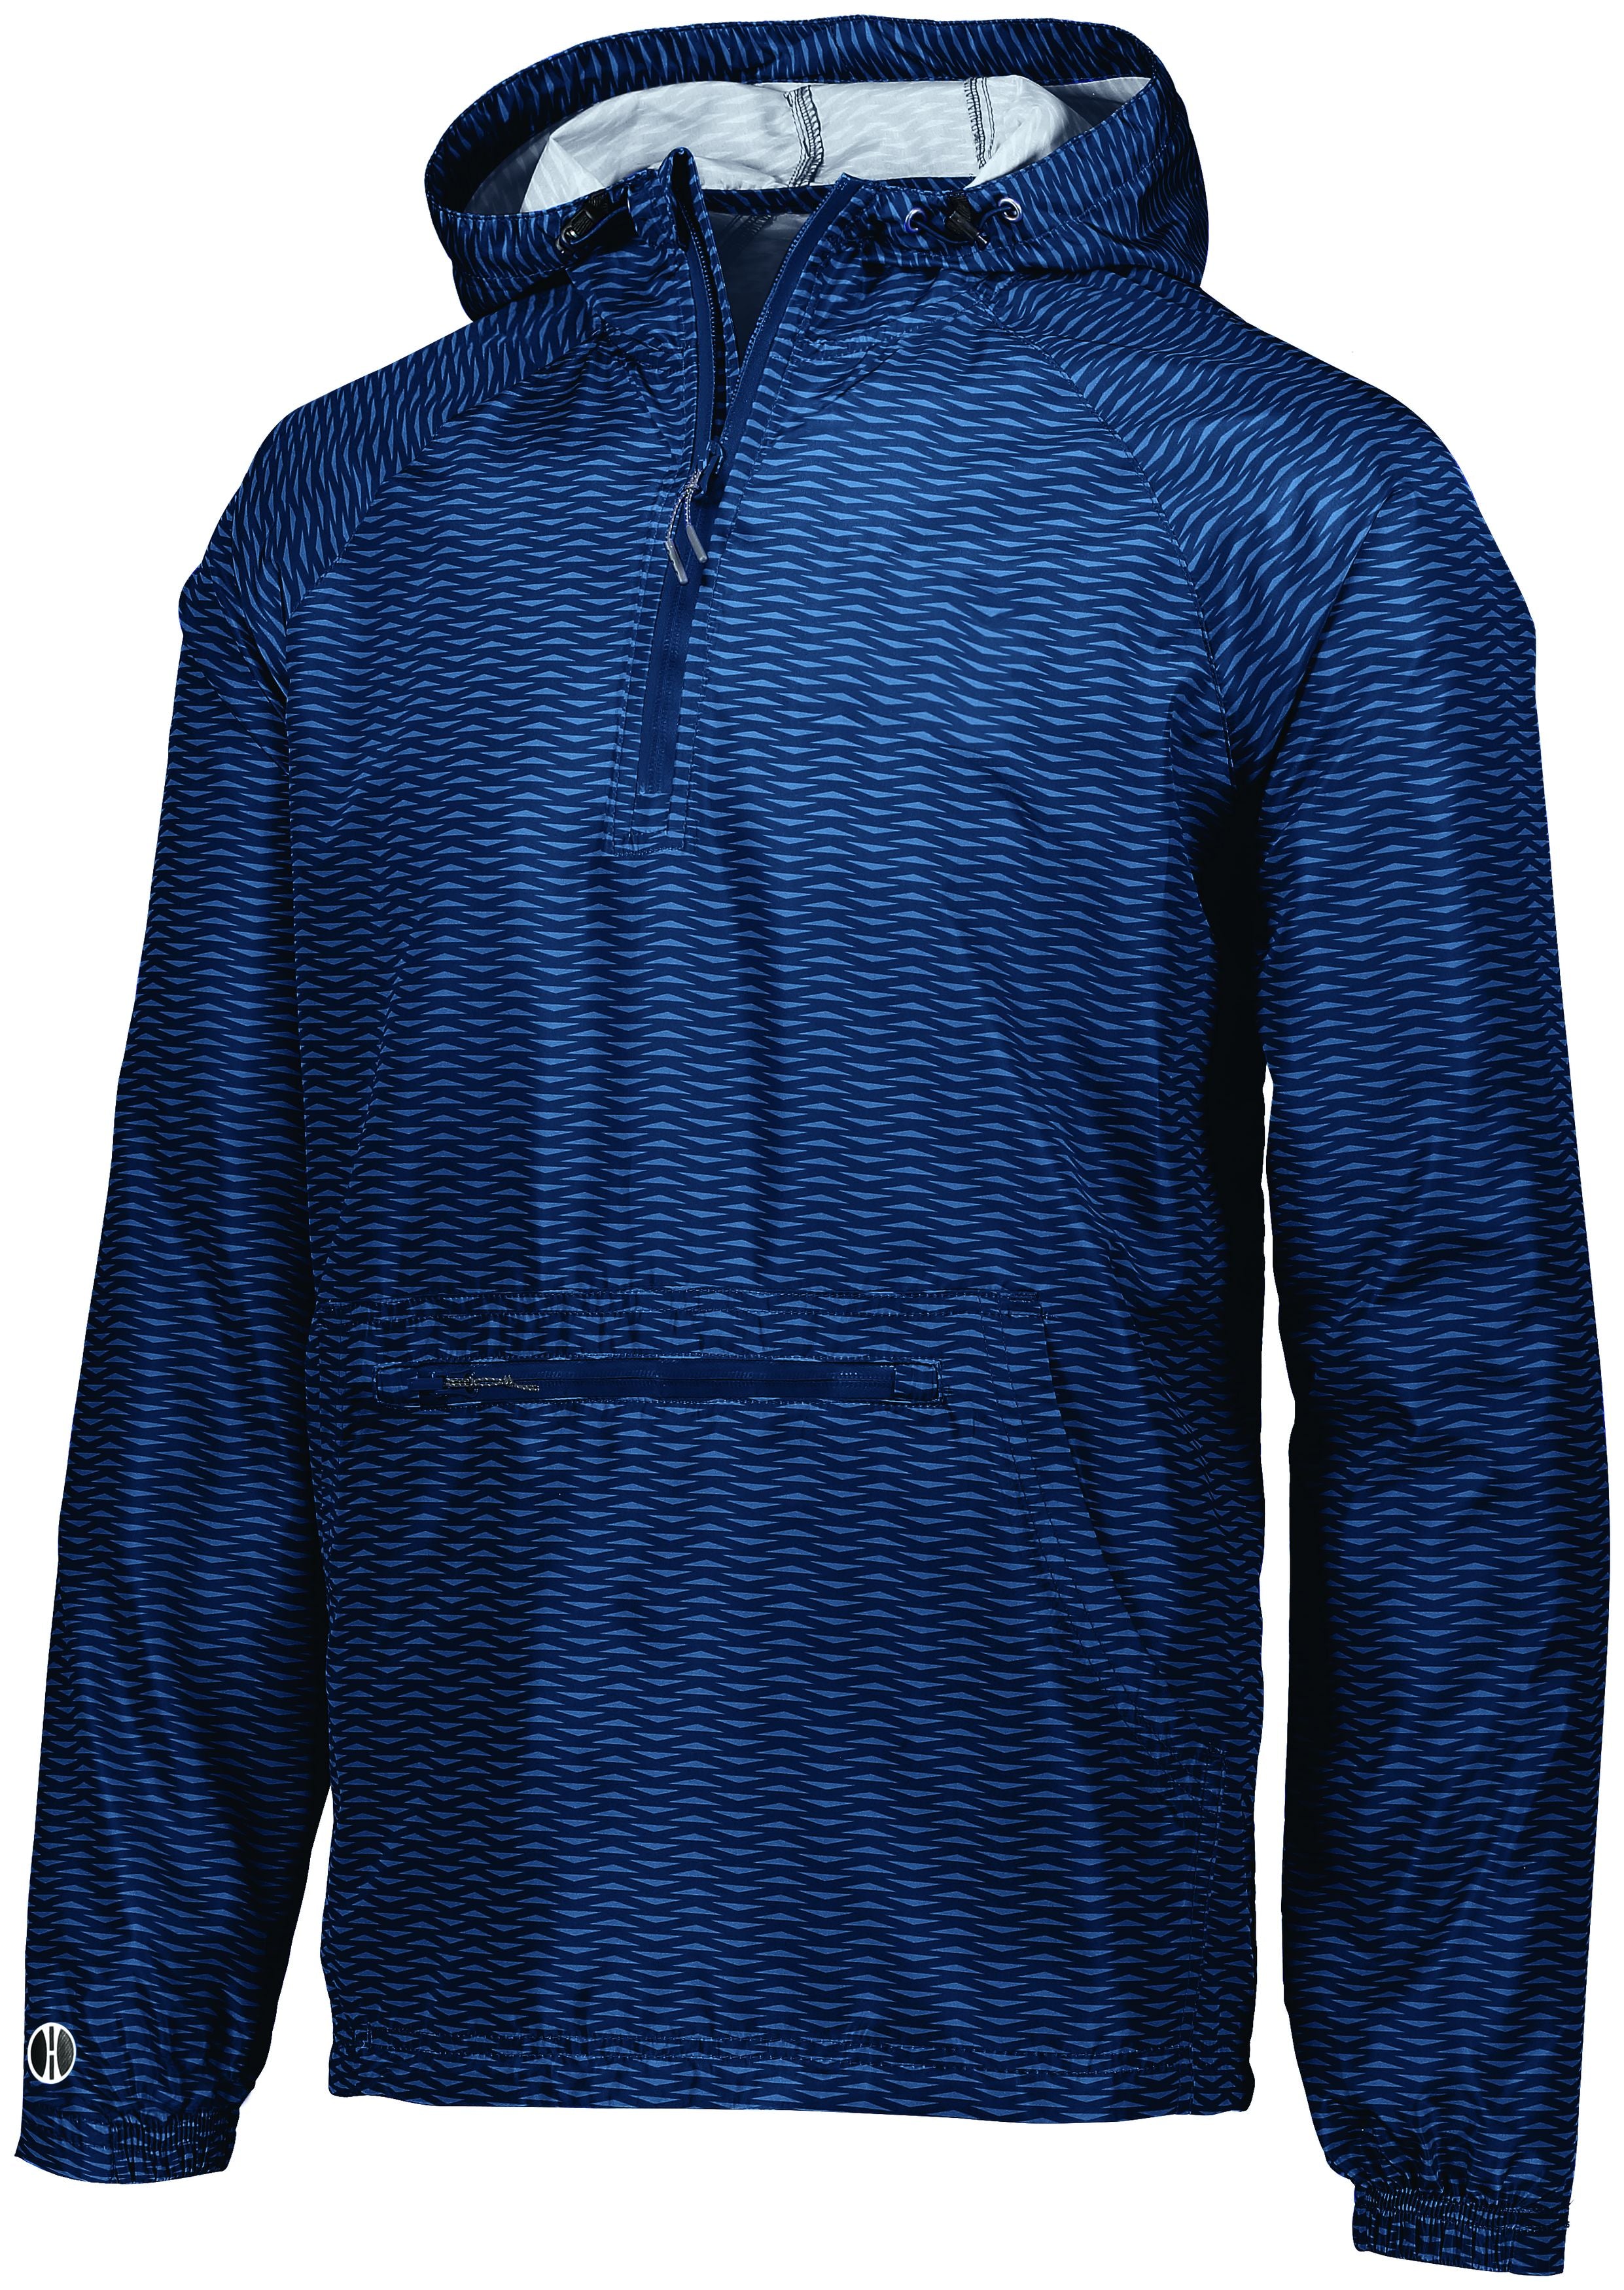 Youth Range Packable Pullover 229654